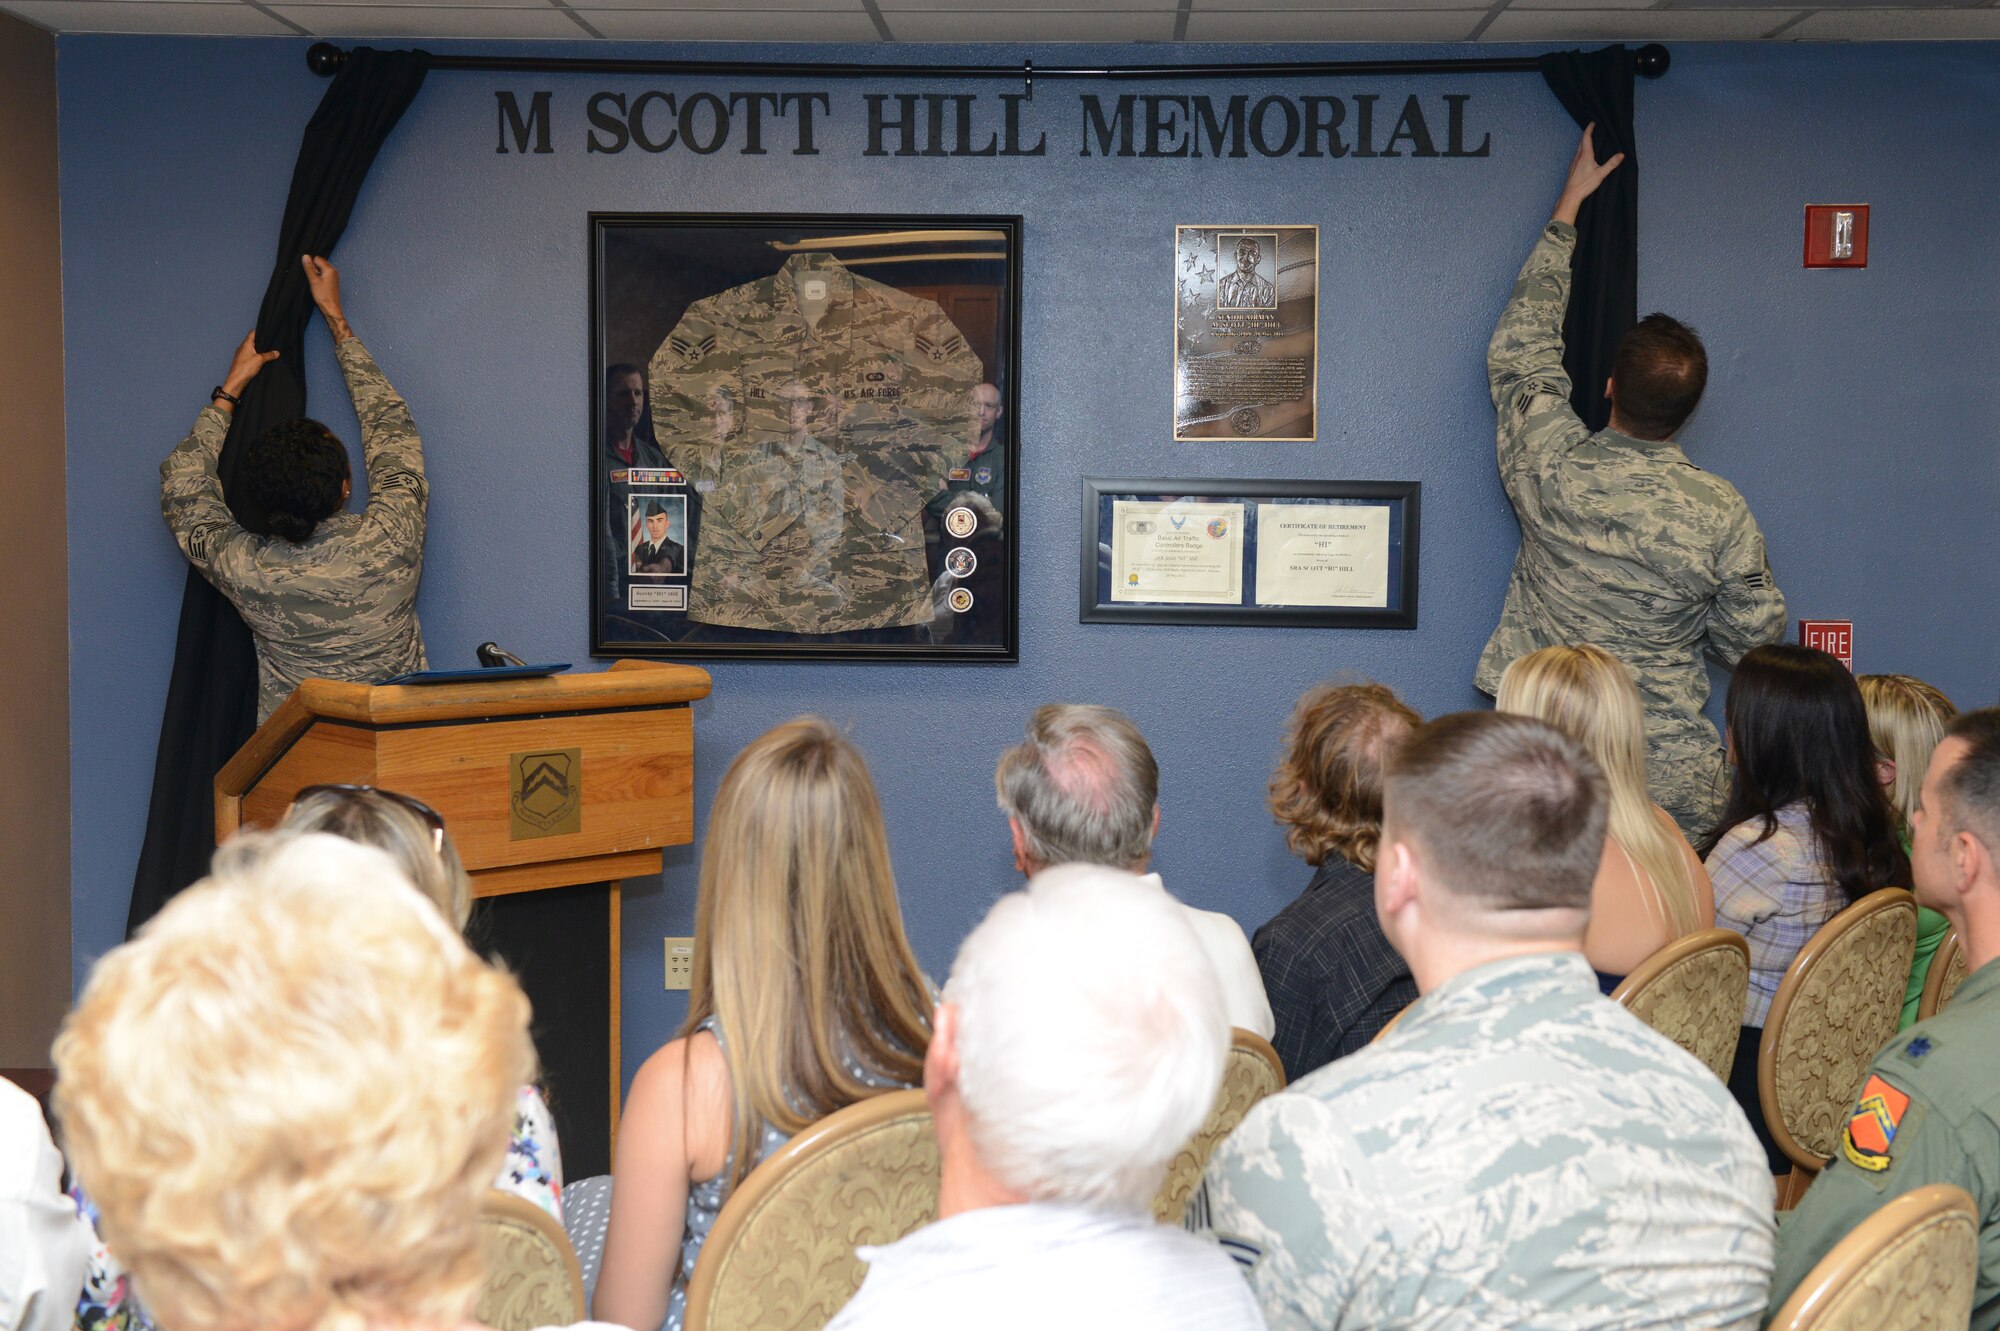 Staff Sgt. Alexena Simien, 56th Operations Support Squadron air traffic controller, and Senior Airman Samuel Bricker, 56th OSS air traffic controller, unveil Senior Airman Scott Hill’s memorial wall during a dedication ceremony at Luke Air Force Base, Arizona, Oct. 26, 2015. Hill lost his battle with cancer and passed away May 18, 2014. The ceremony also retired Hill’s air traffic controller initials: HI. The initials are a special identifier for controllers and HI will be Hill’s at Luke forever. (U.S. Air Force photo by Senior Airman James Hensley)